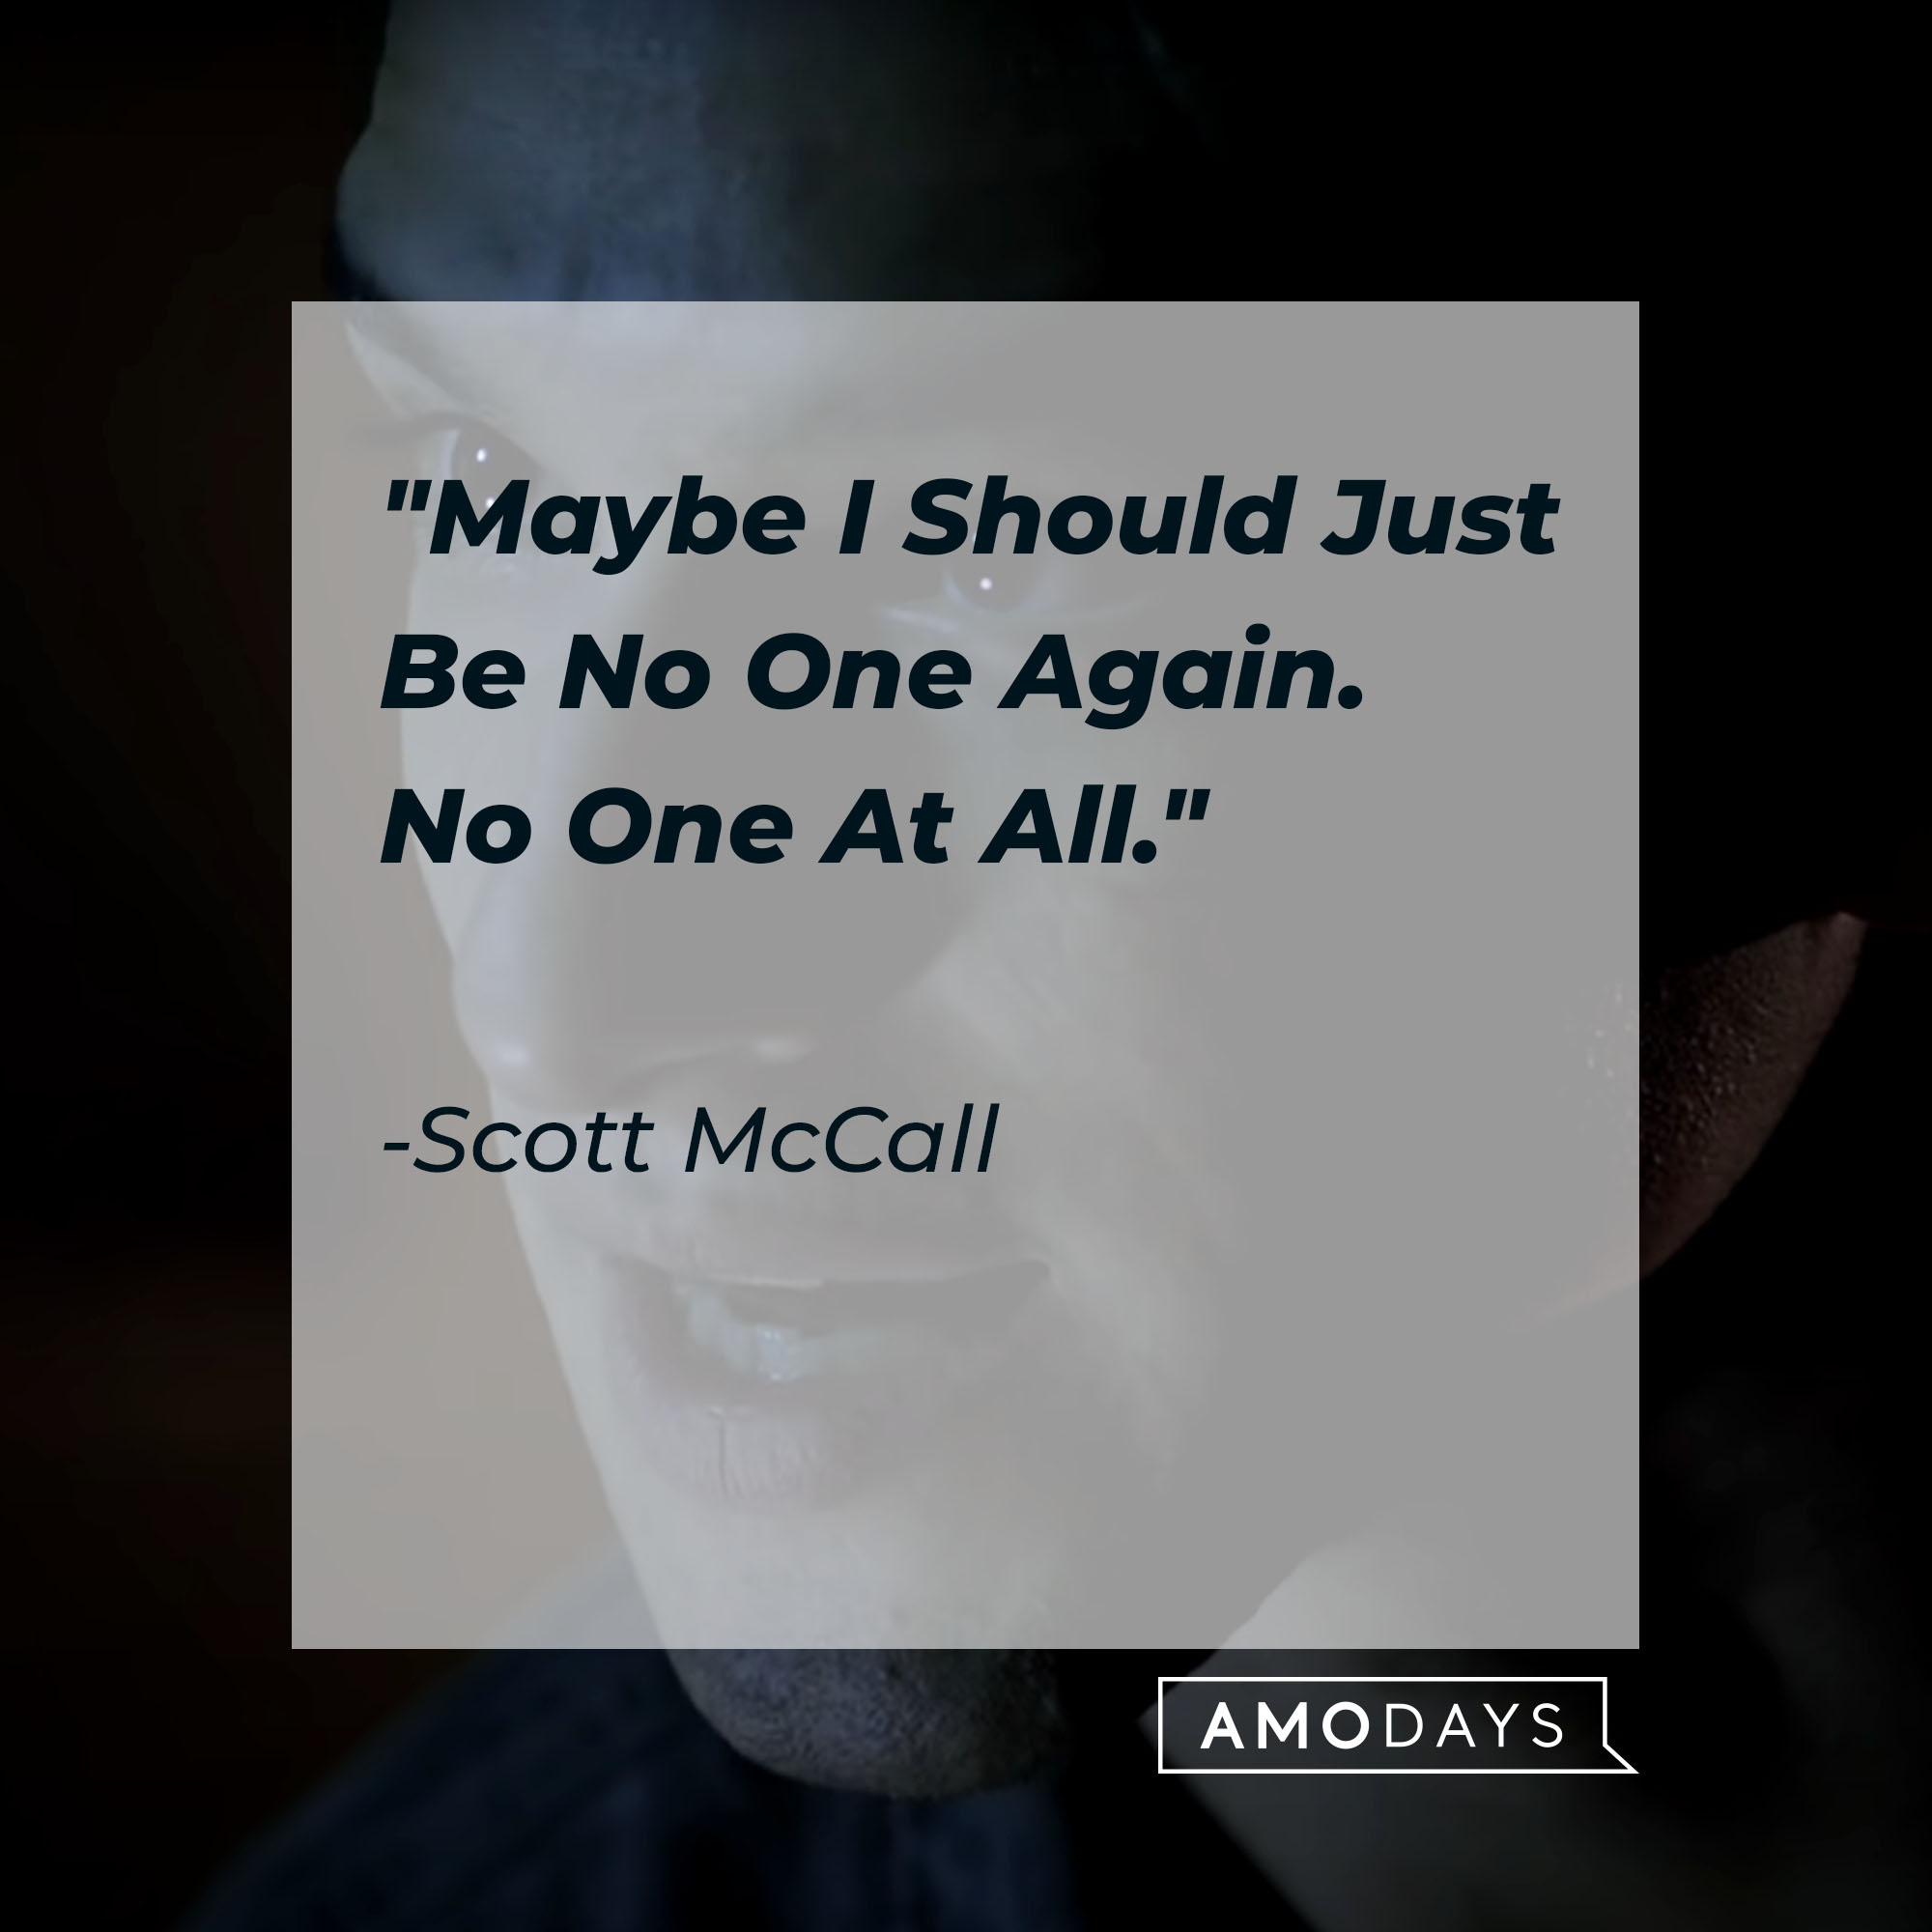 Scott McCall's quote: "Maybe I Should Just Be No One Again, No One At All" | Source: Youtube.com/WolfWatch